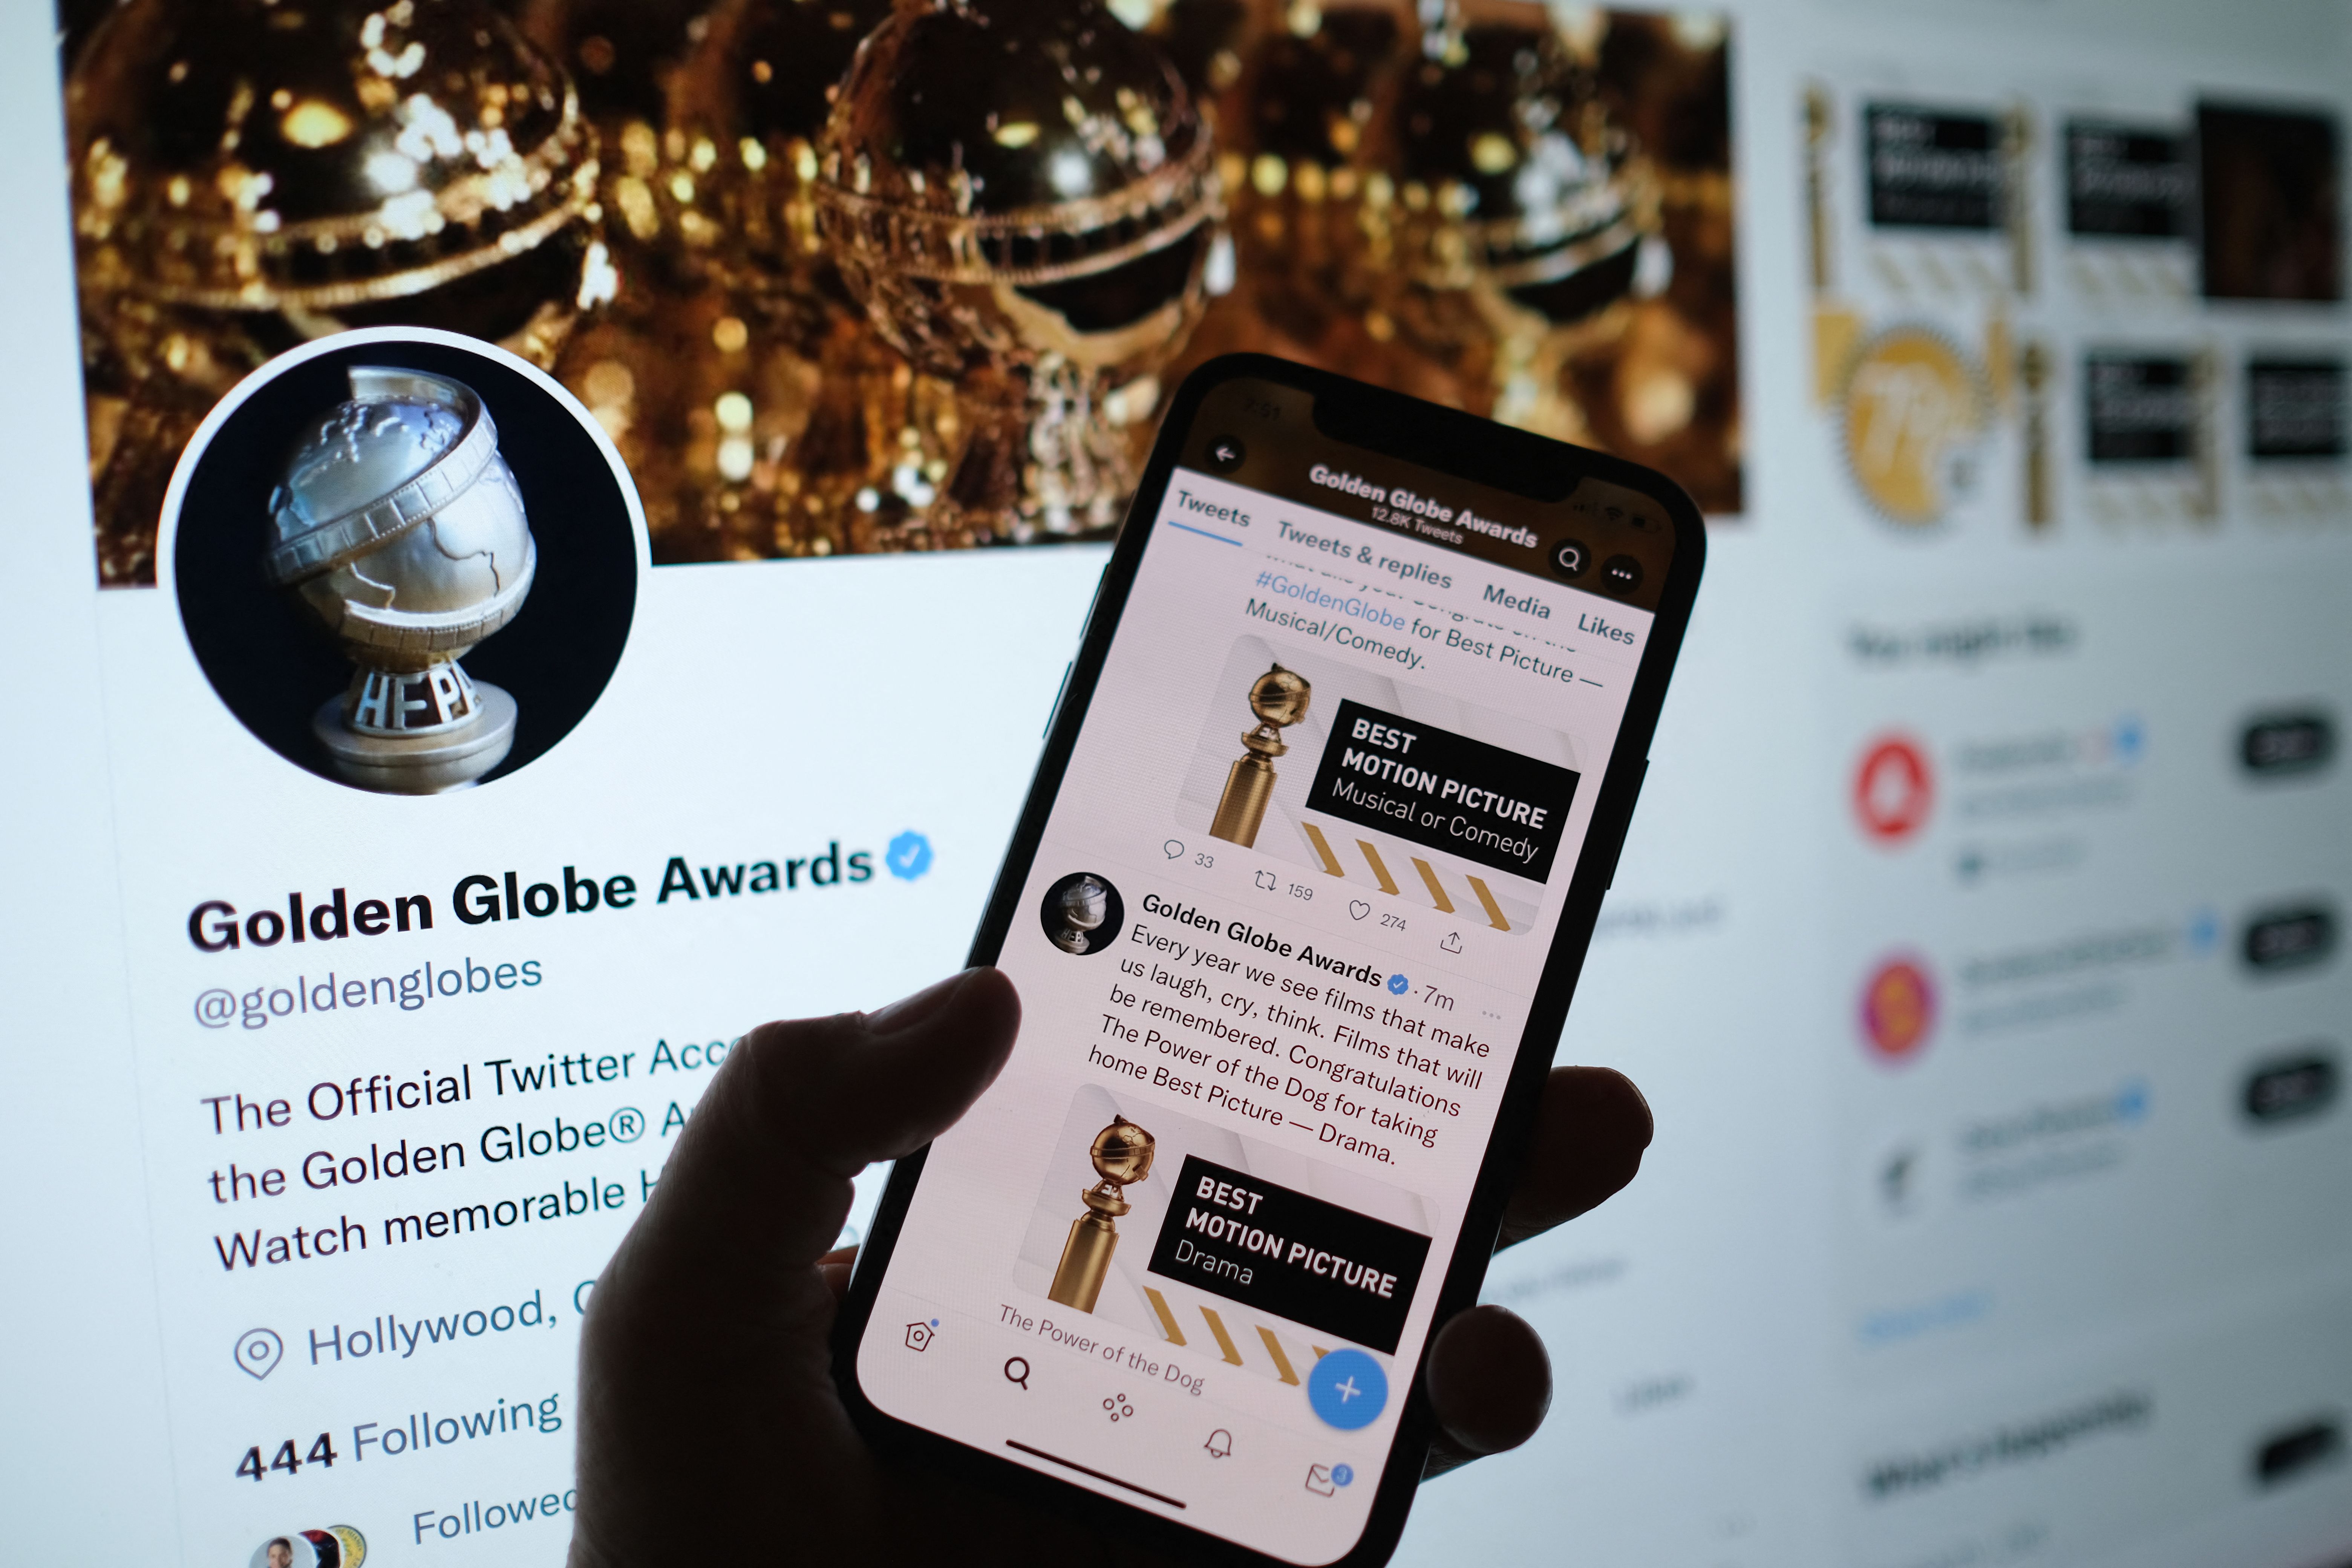 Twitter page of Golden Globe awards